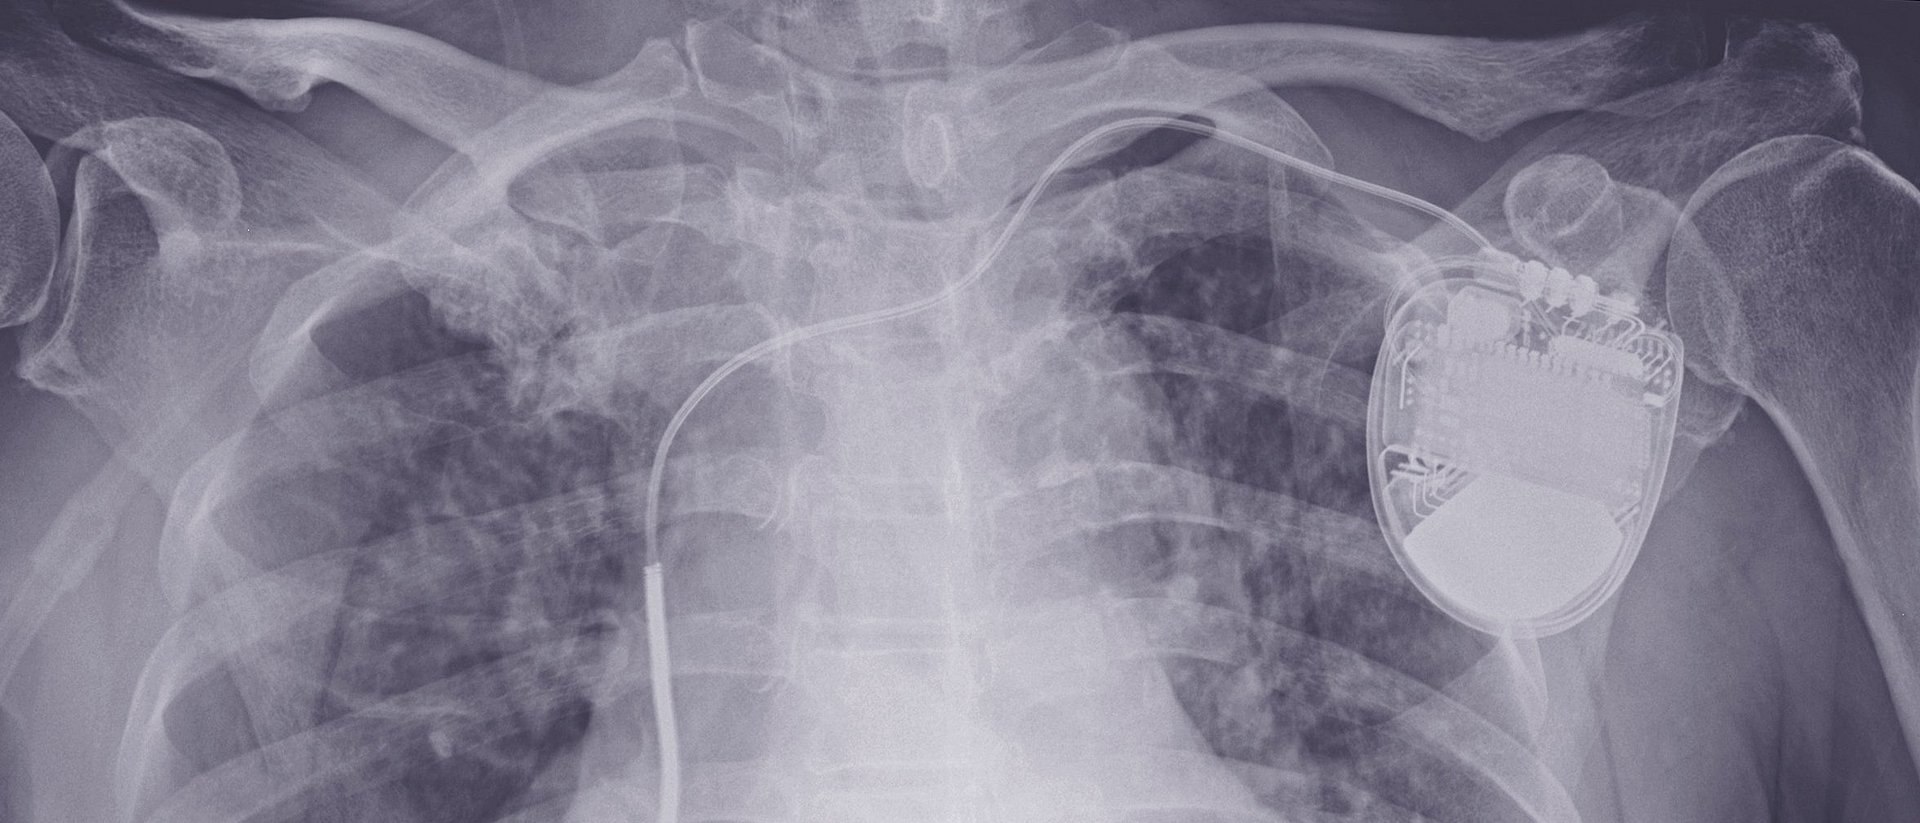 An x-ray image of a patient with an implanted defibrillator